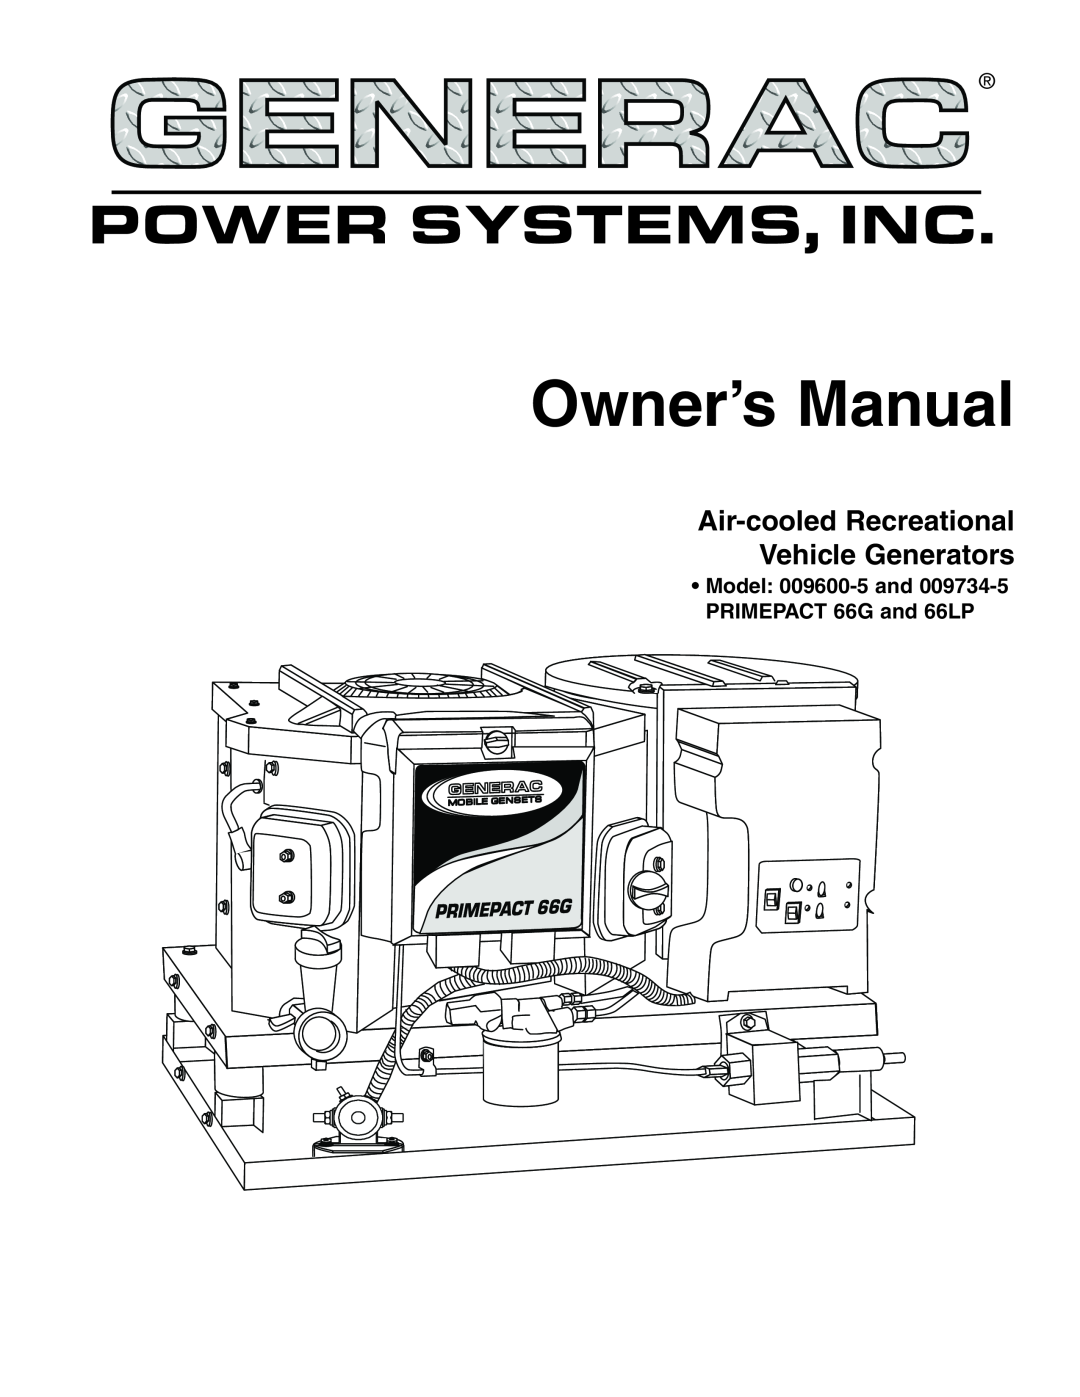 Generac Power Systems 009600-5, 009734-5 owner manual Model 009600-5and PRIMEPACT 66G and 66LP, Owner’s Manual 